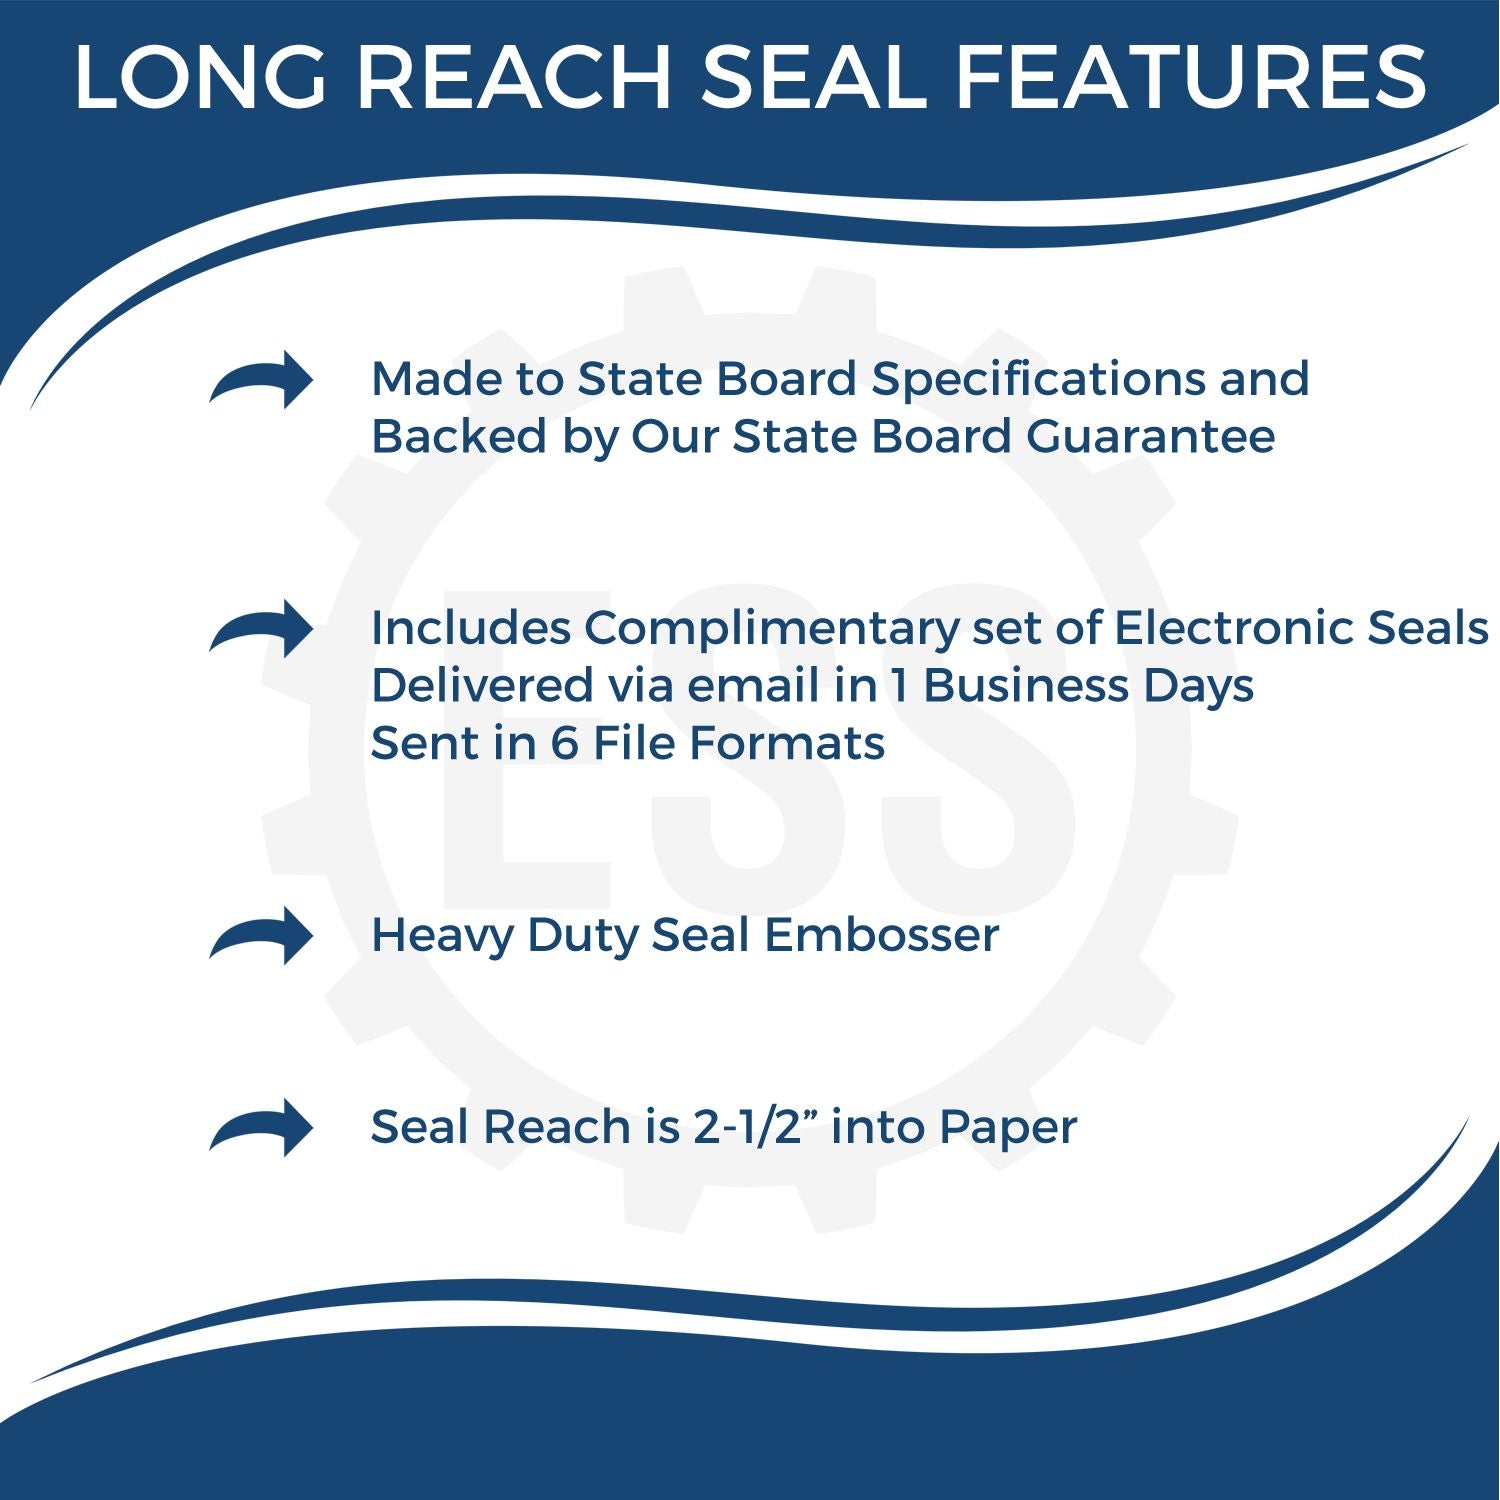 The main image for the Long Reach Texas PE Seal depicting a sample of the imprint and electronic files